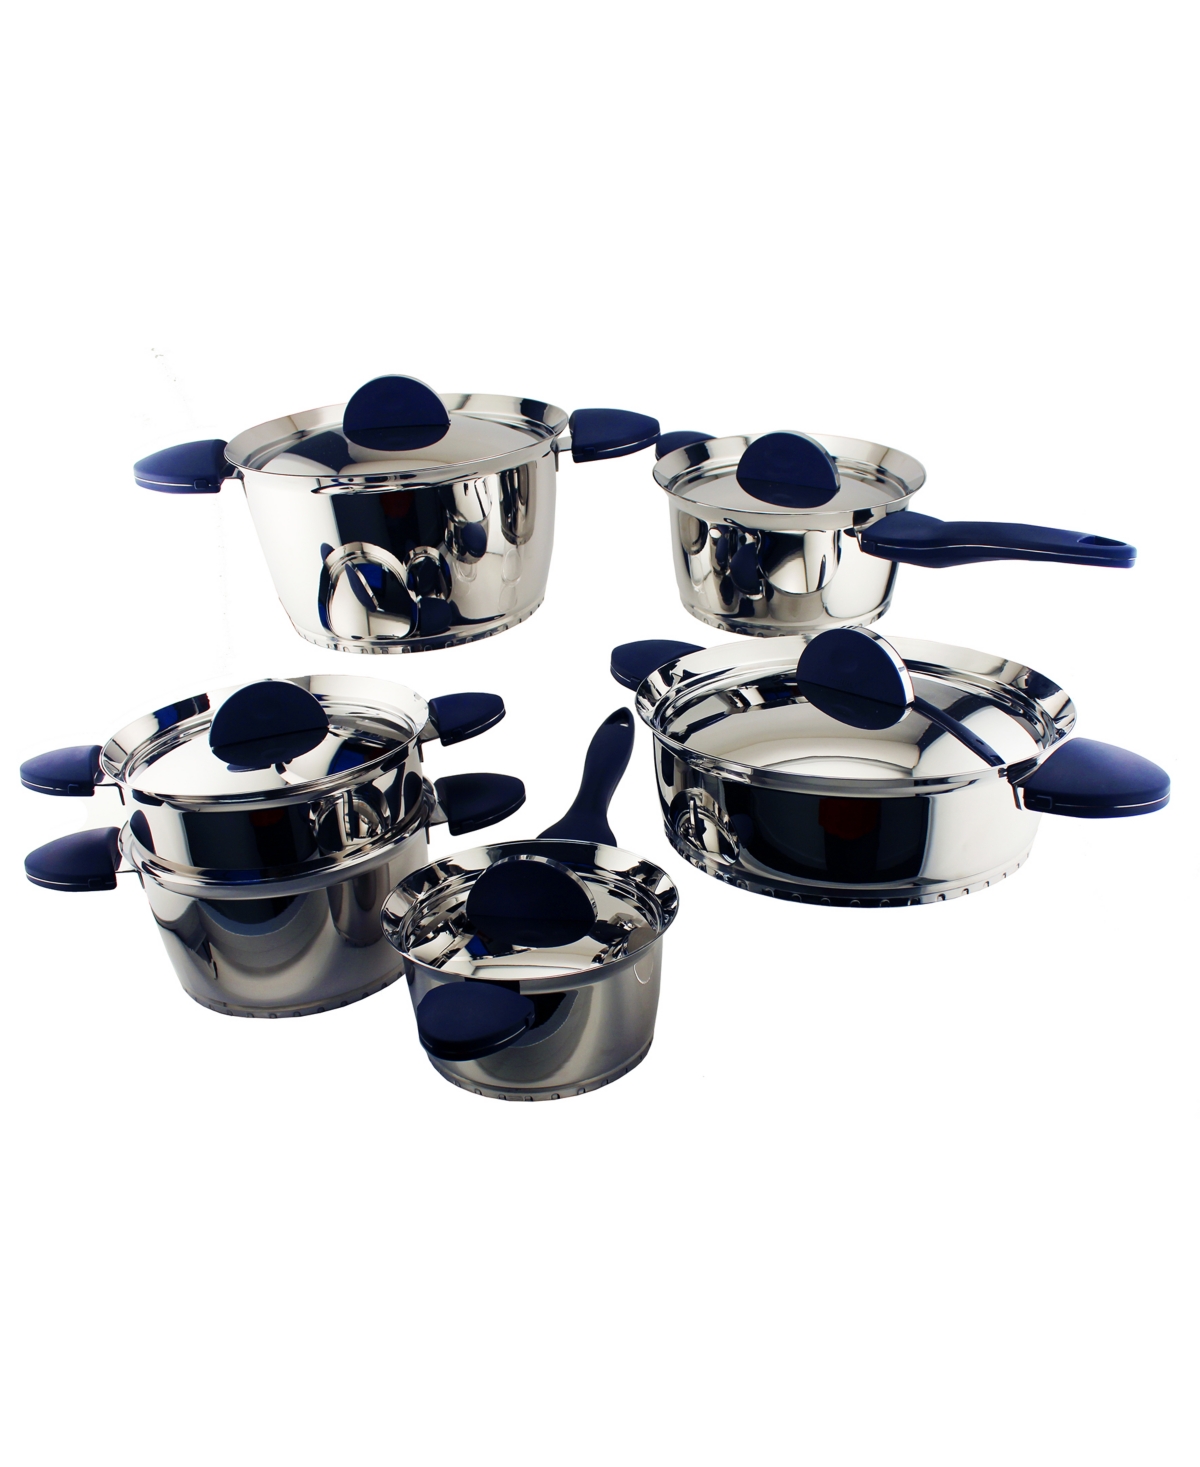 12444991 Stacca Stainless Steel 11 Piece Cookware Set sku 12444991